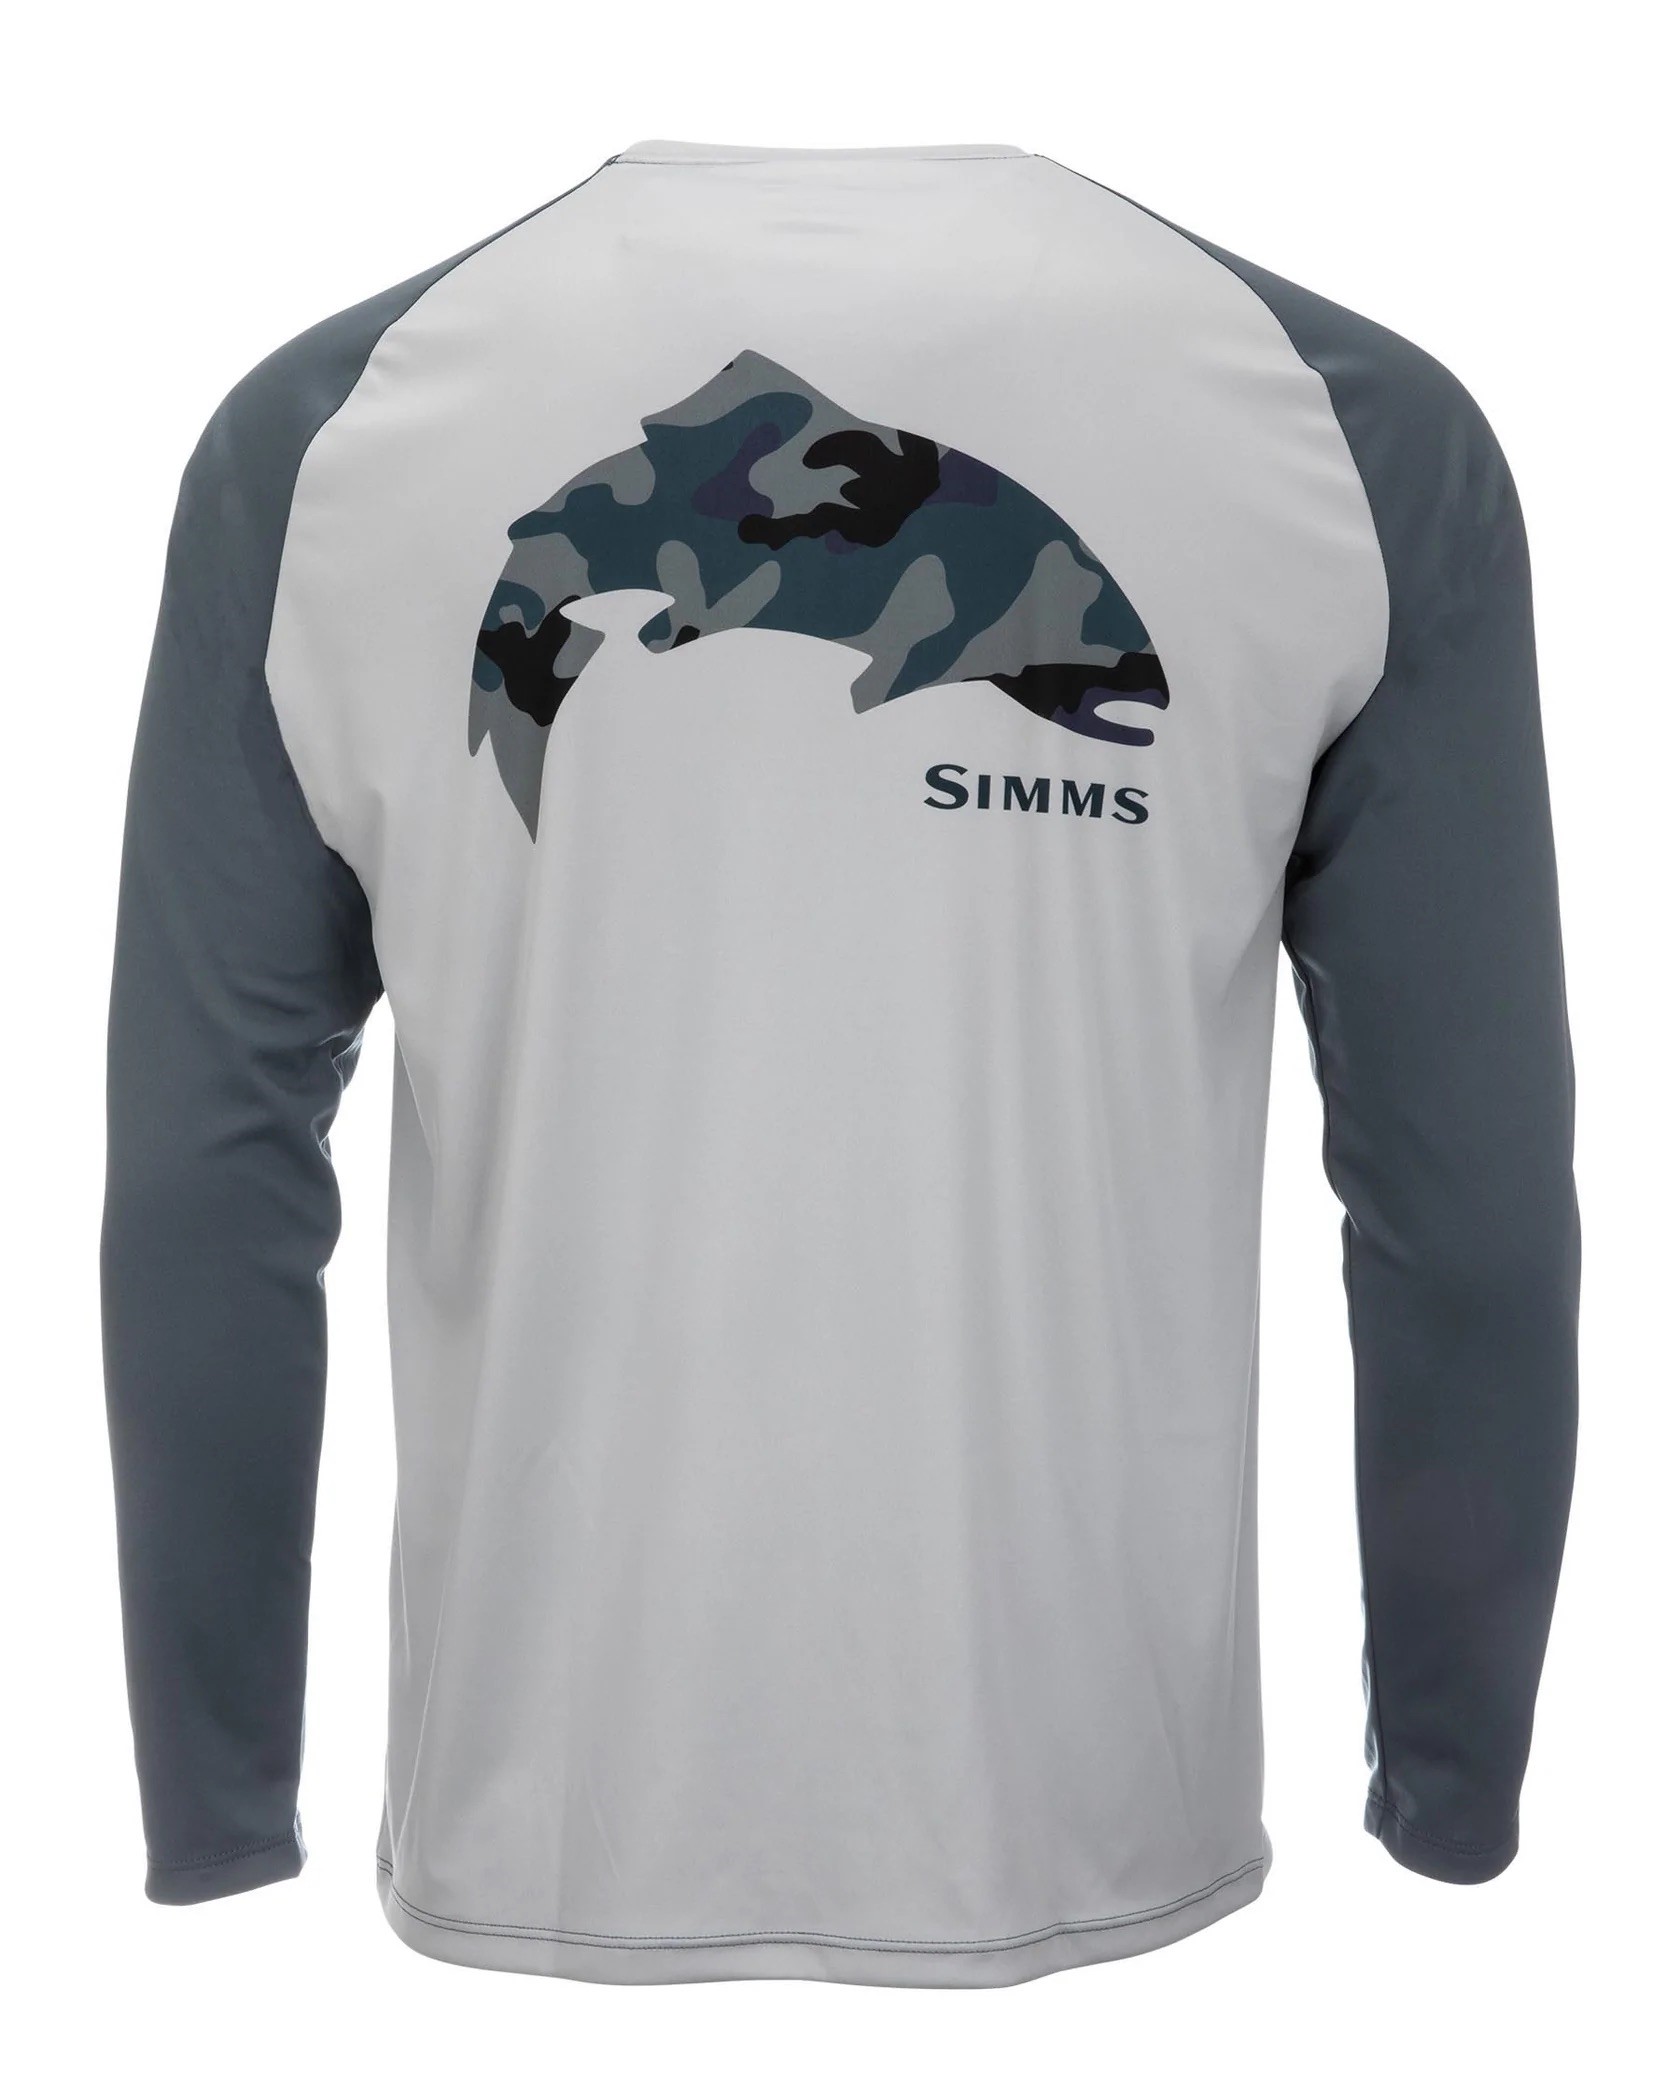 Simms M's Tech Tee - Trout/Sterling/Storm - Large